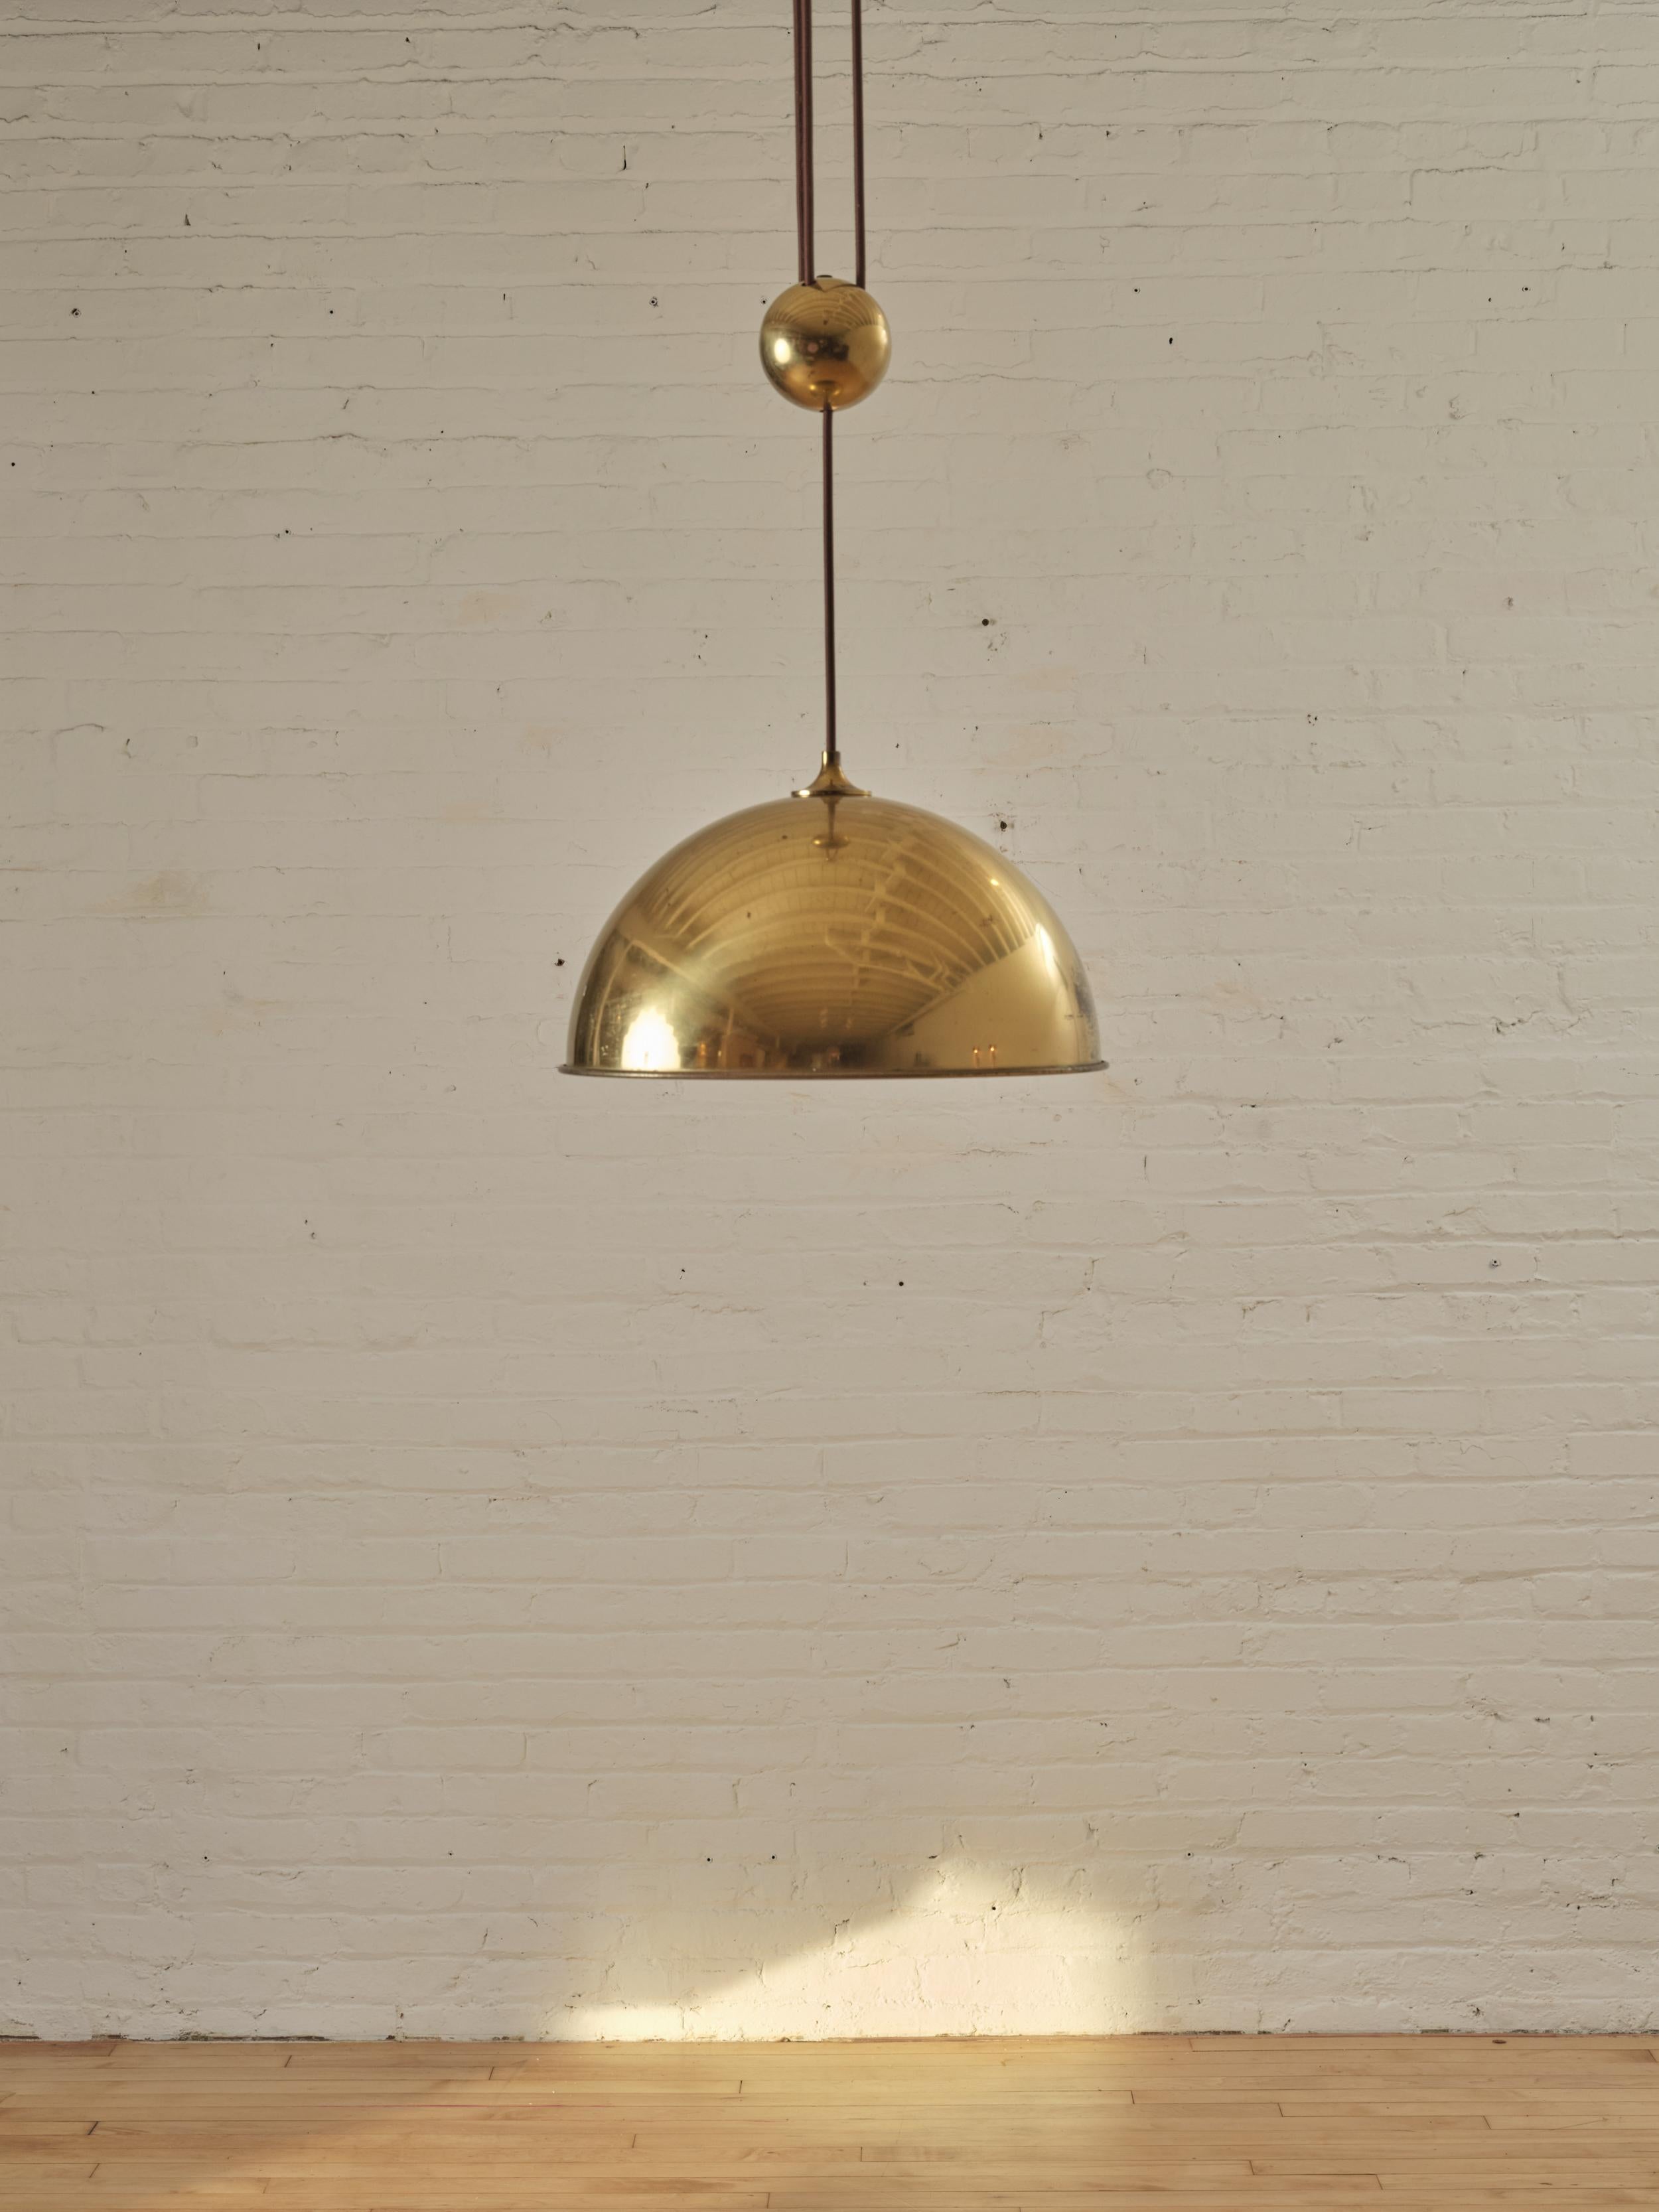 Duos 36' Counter Balance Pendant by Florian Schulz and Jens Schump in polished Brass featuring a center pull for height adjustment.

